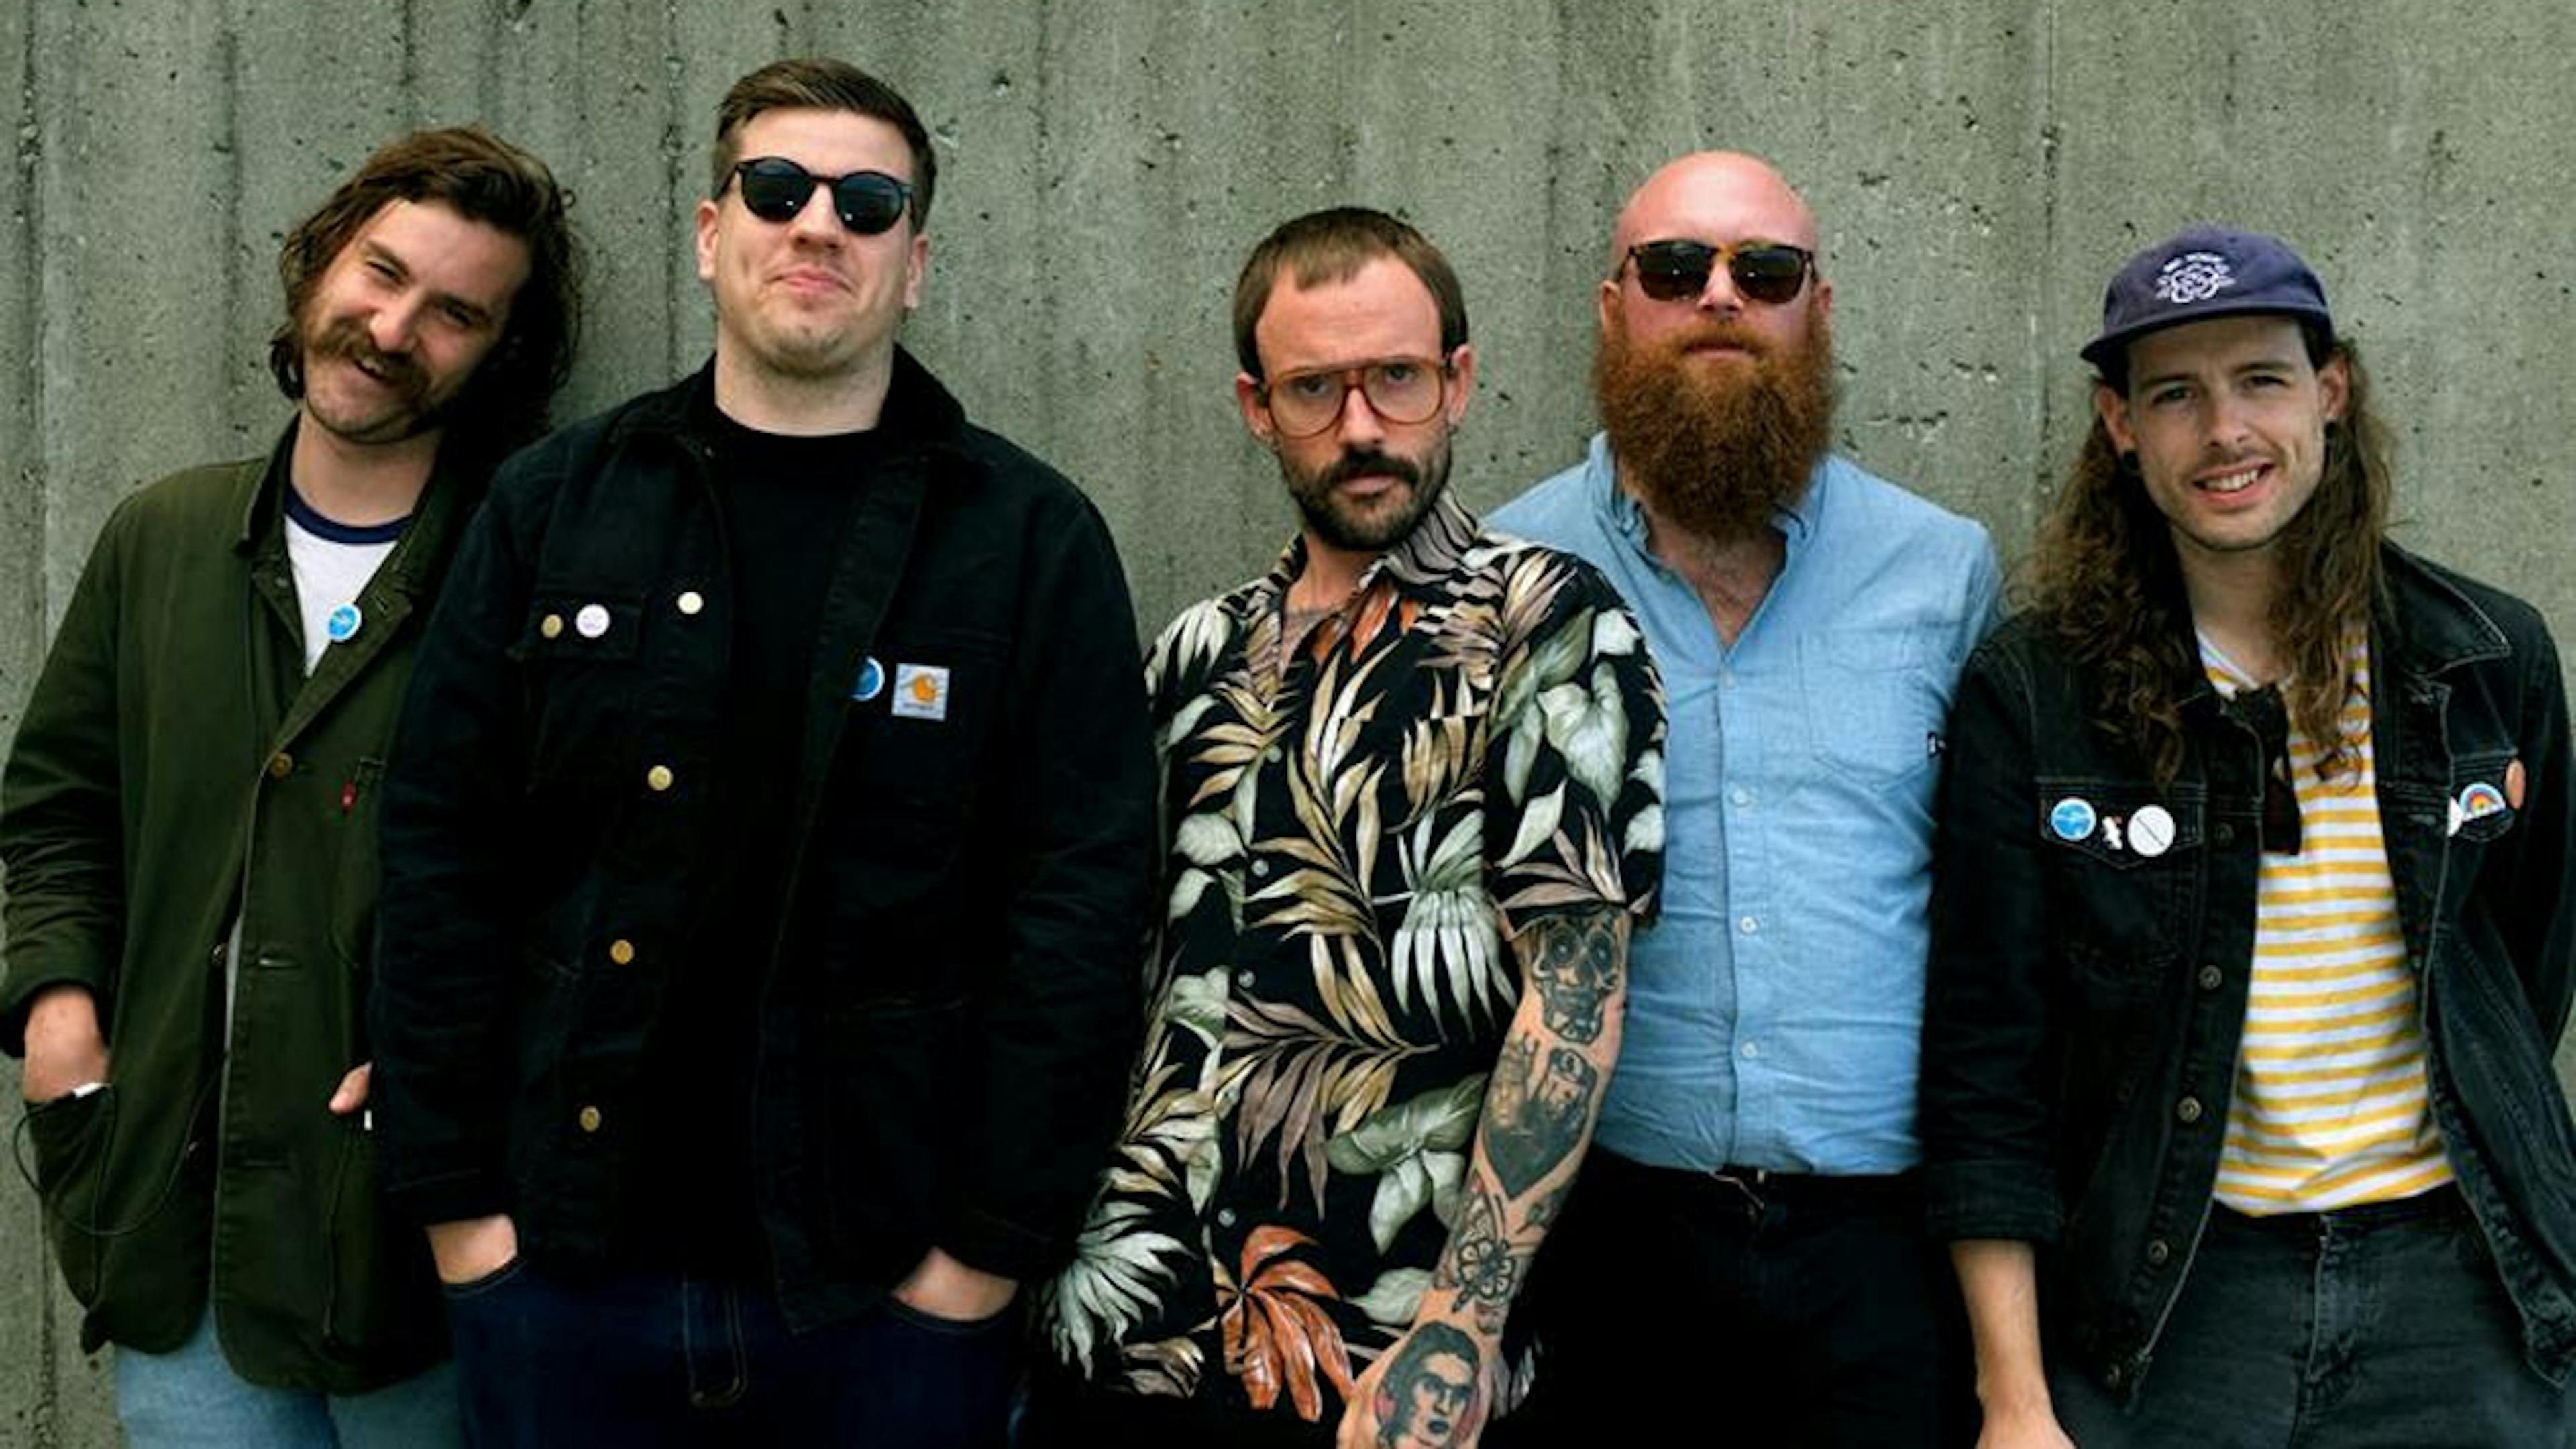 IDLES Have Announced A UK Tour